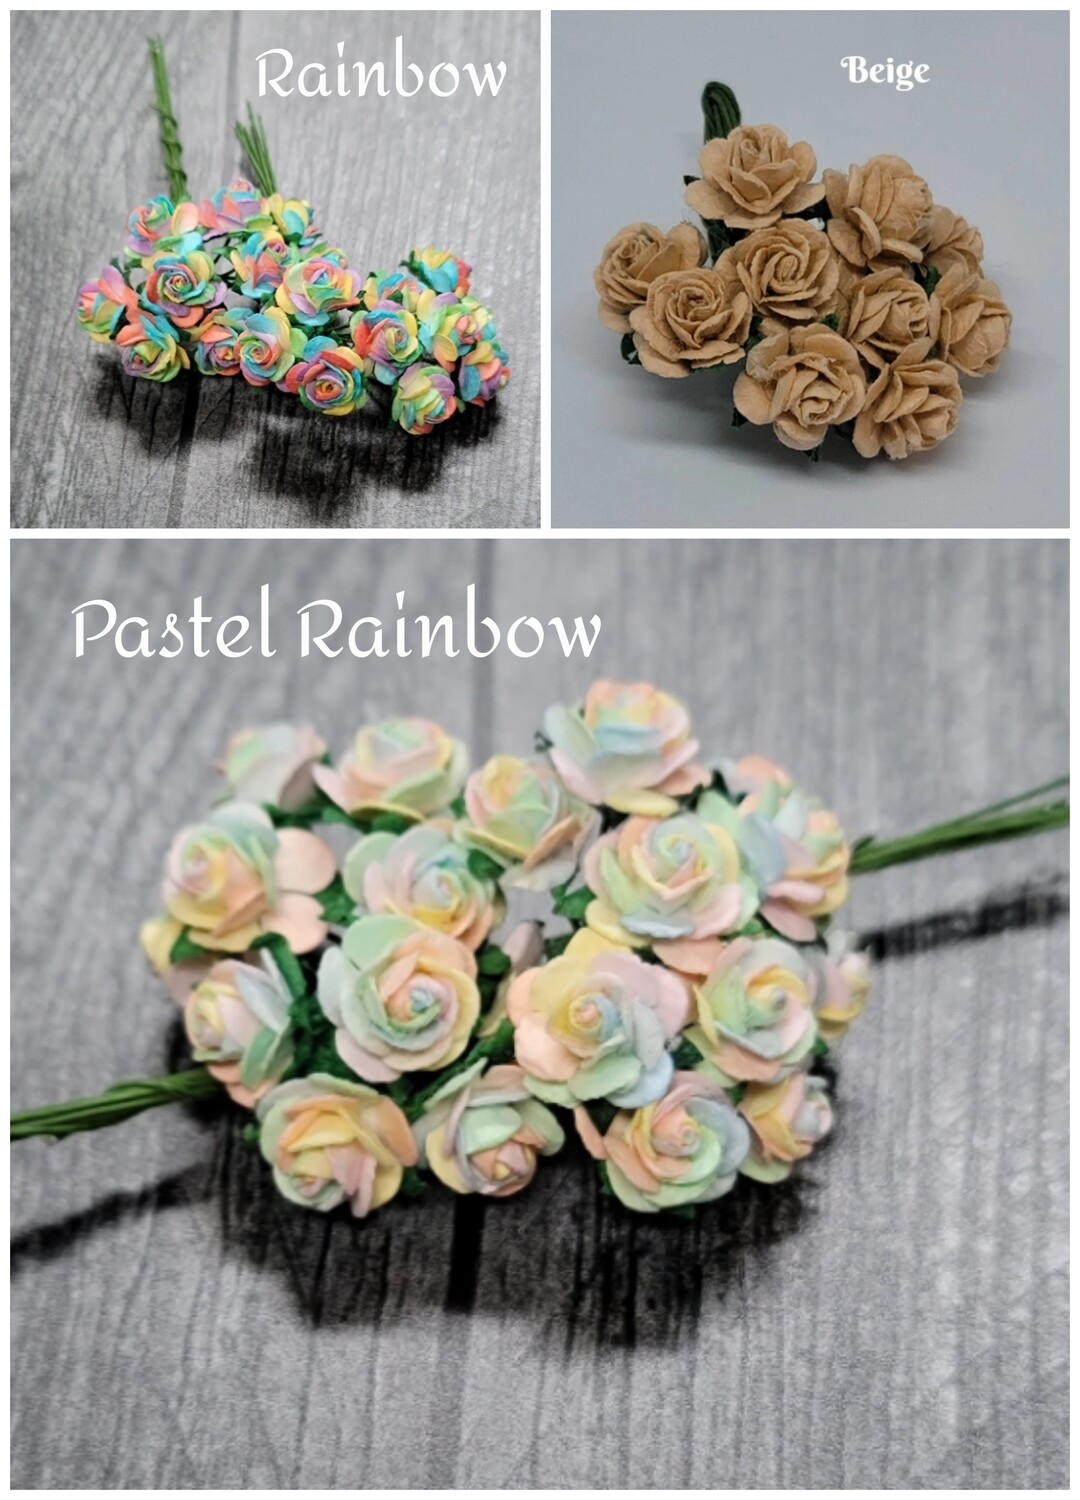 15mm Open Roses Color Set 7 - Promlee Flowers